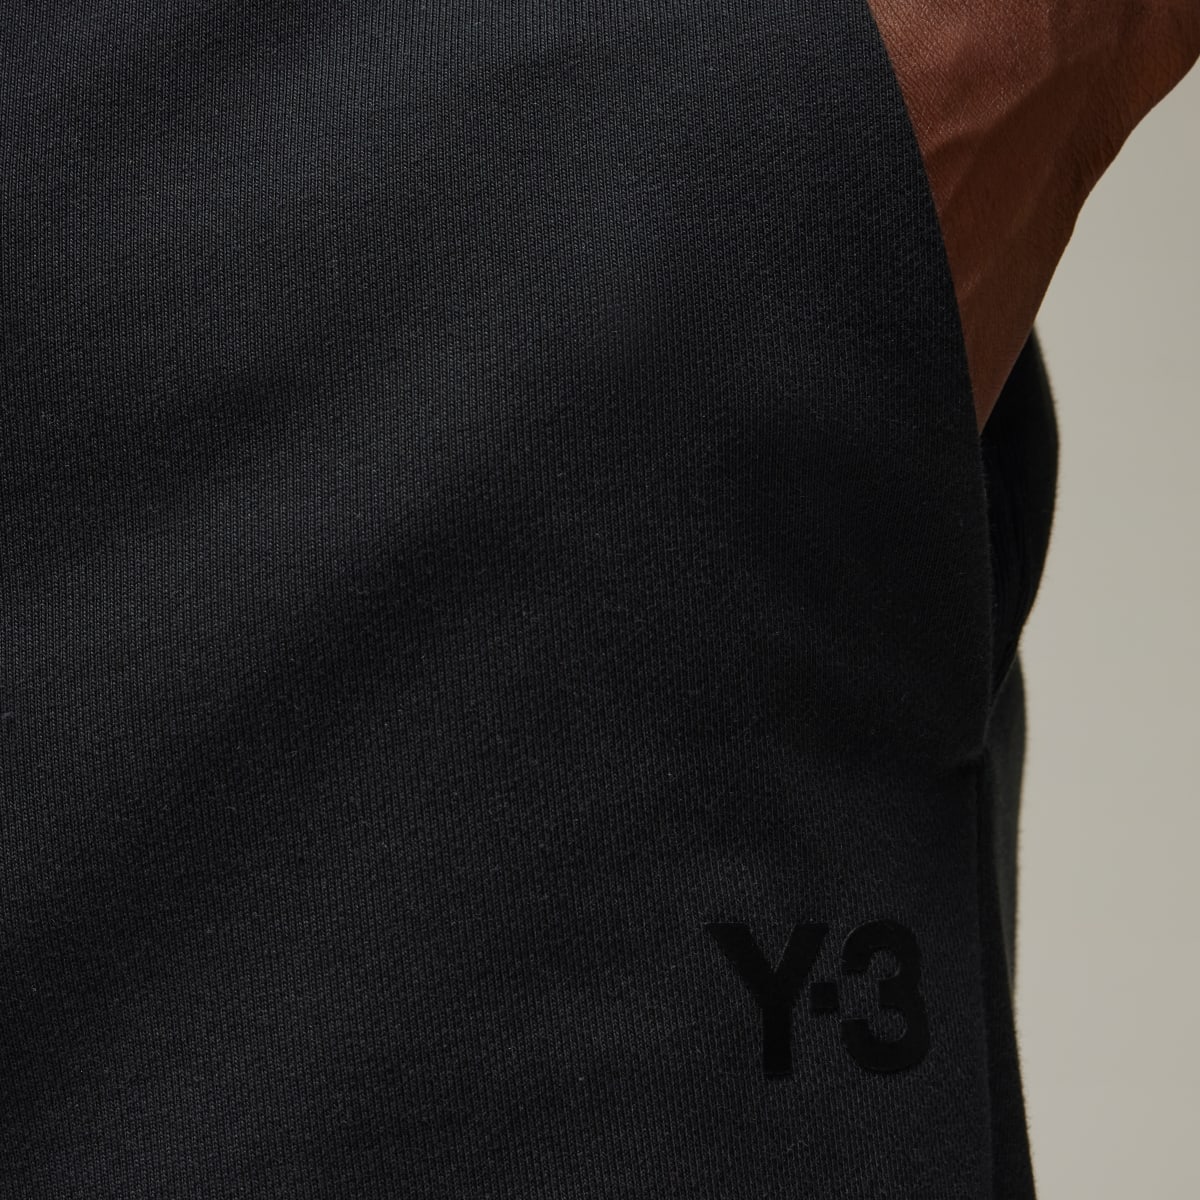 Adidas Y-3 French Terry Cuffed Pants. 7